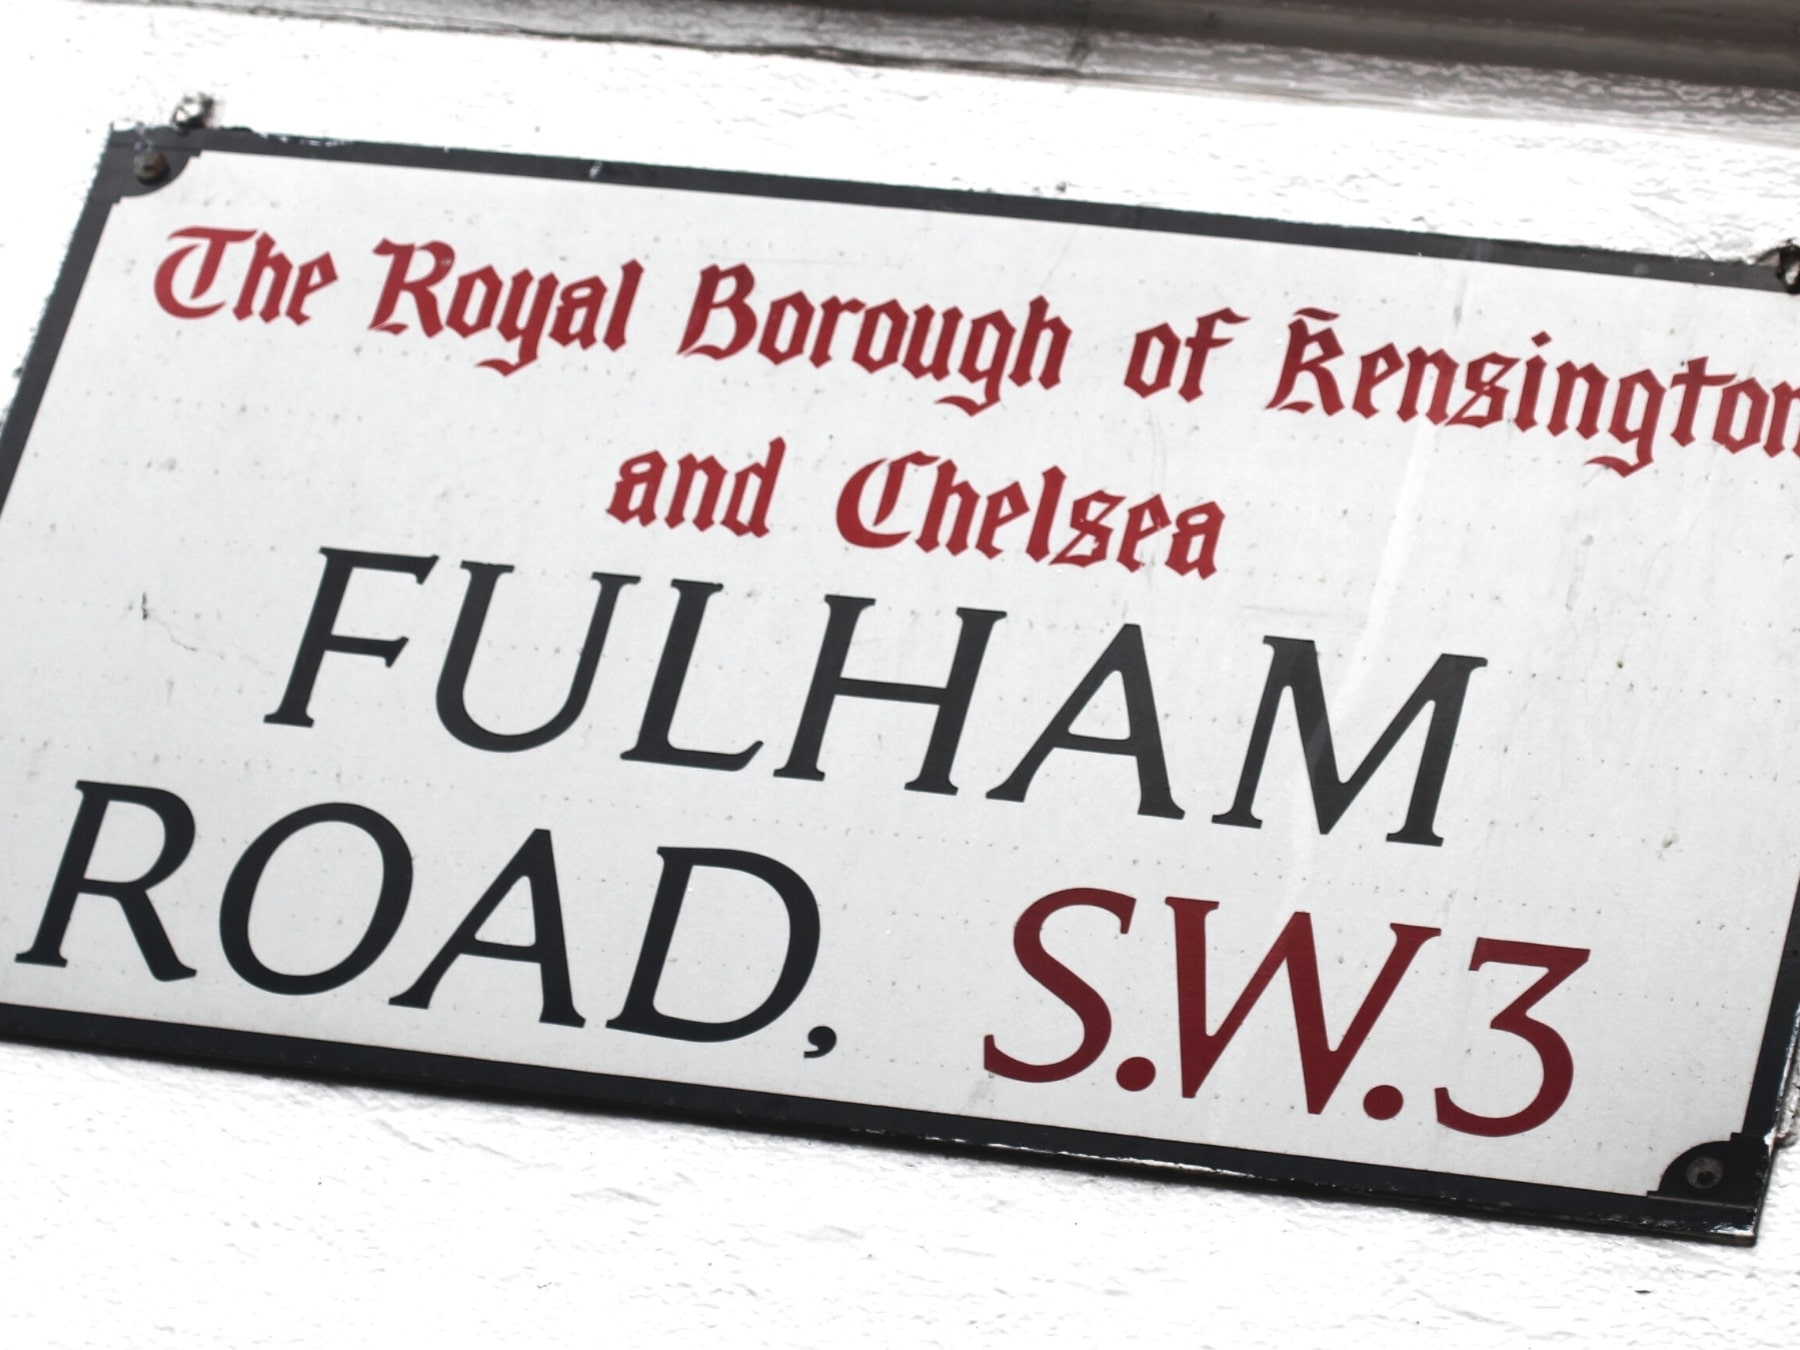 FULHAM ROAD......Guided walking tour